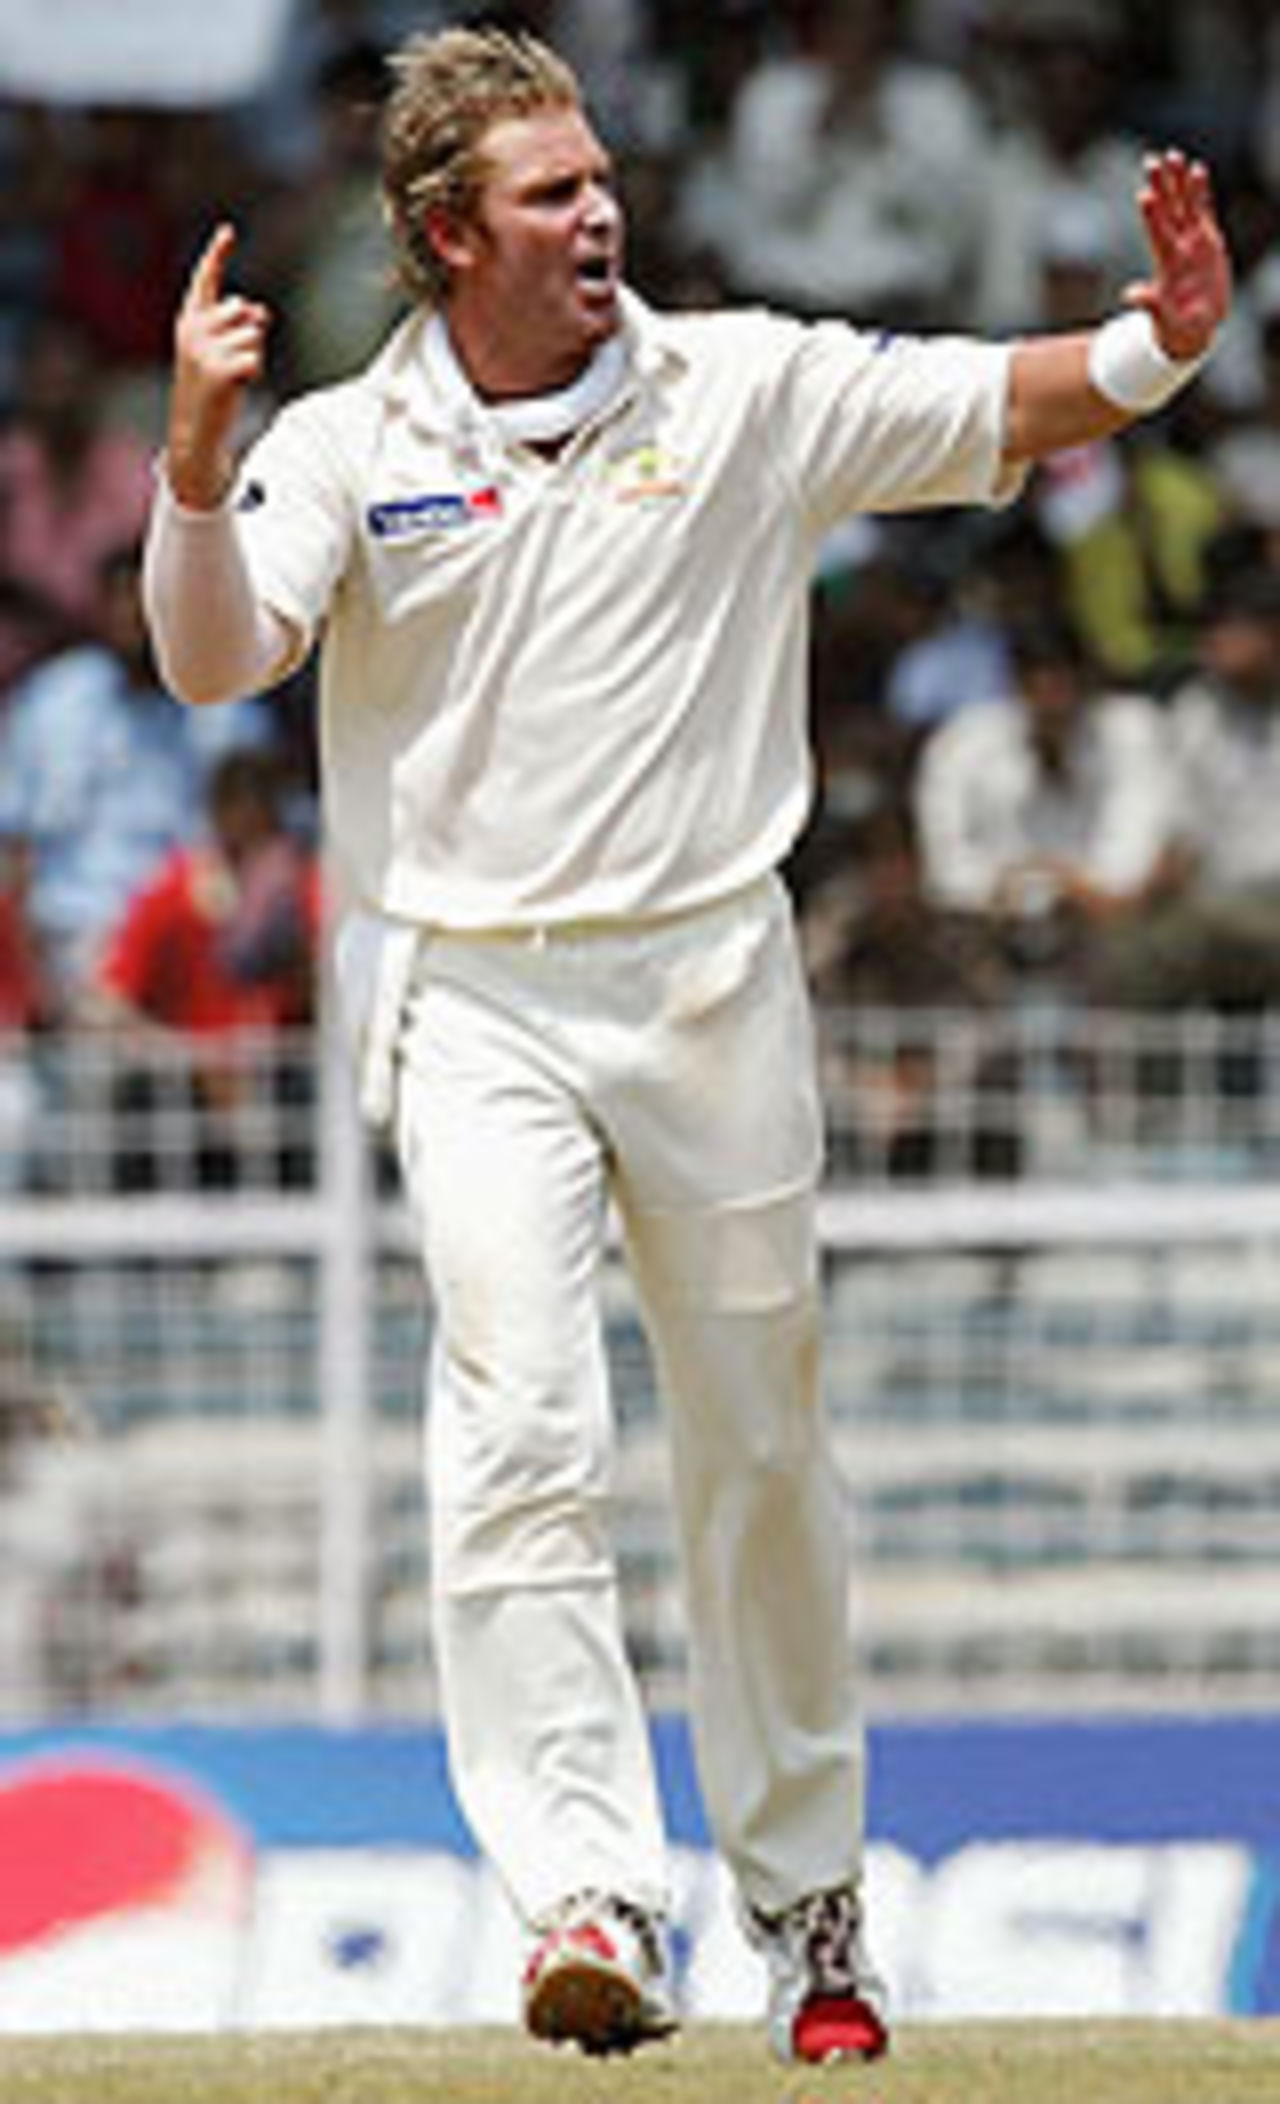 Shane Warne gets a wicket on his way to a six-wicket haul, India v Australia, 2nd Test, Chennai, 3rd day, October 16, 2004